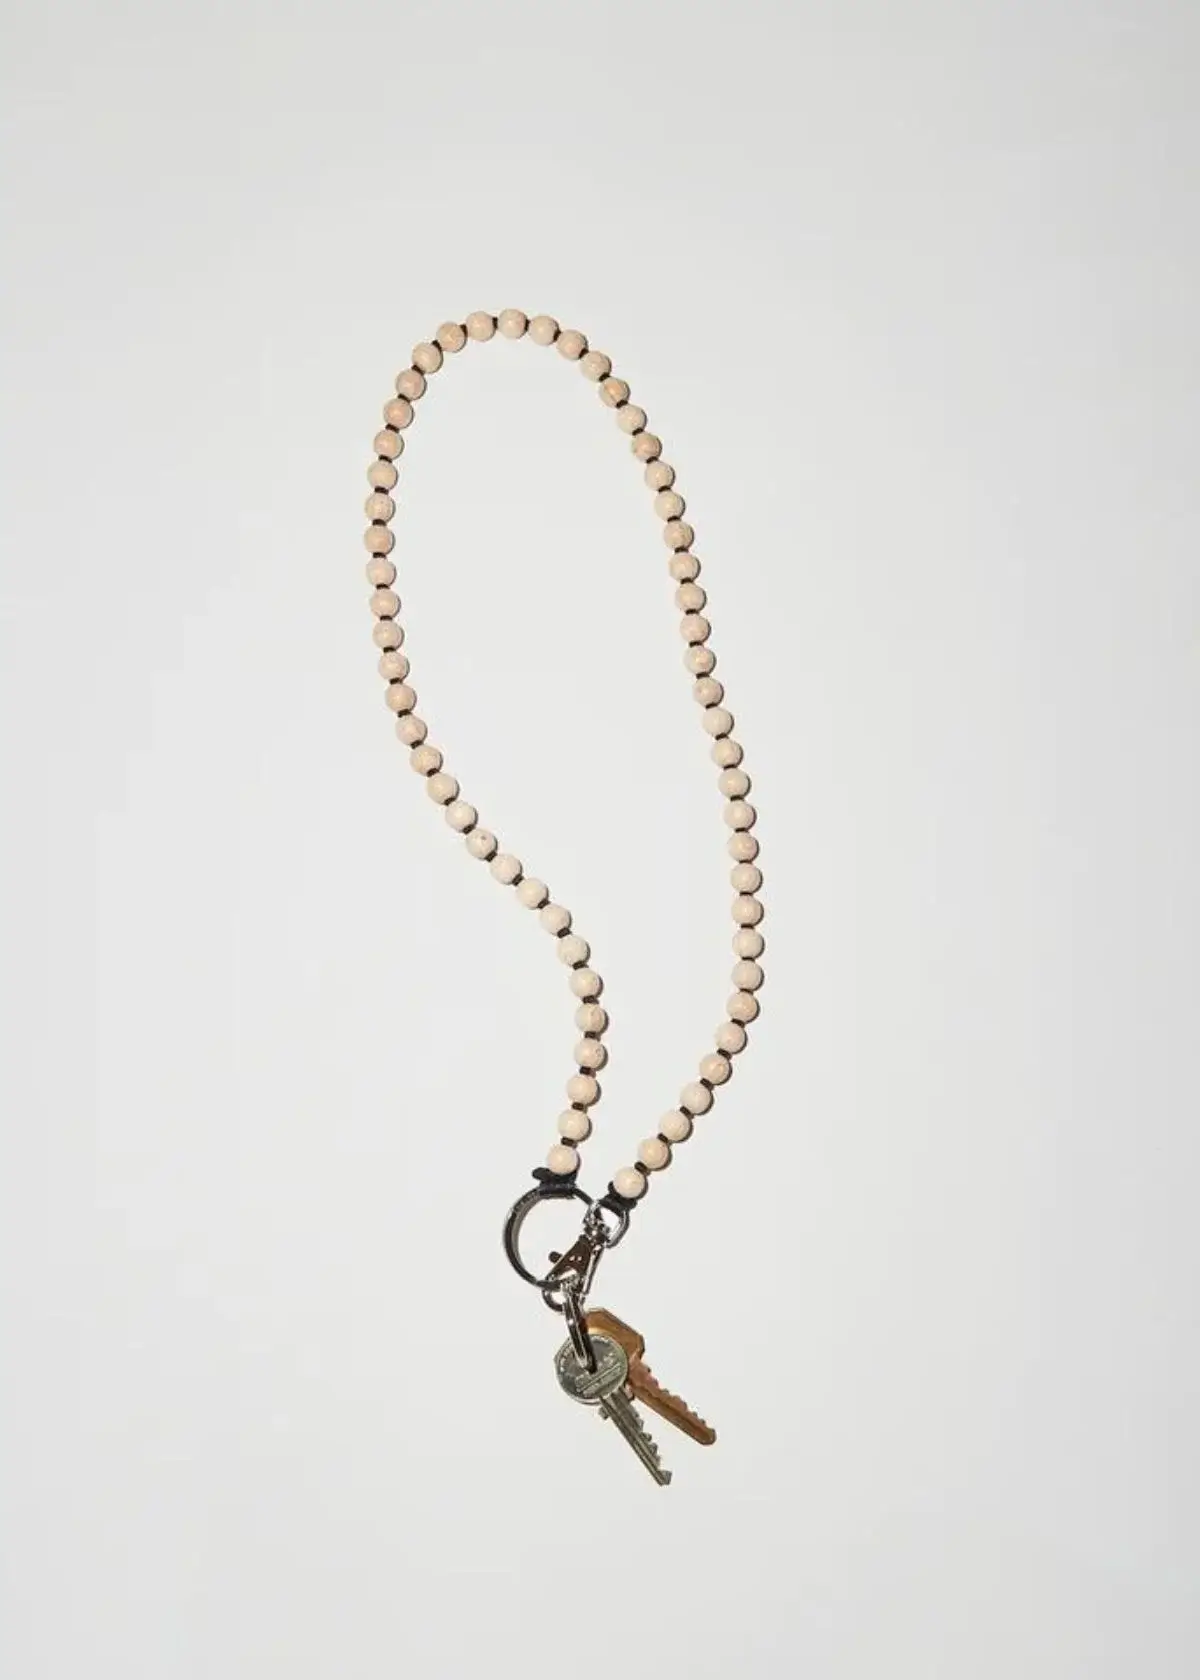 How to choose the right key holder necklace?